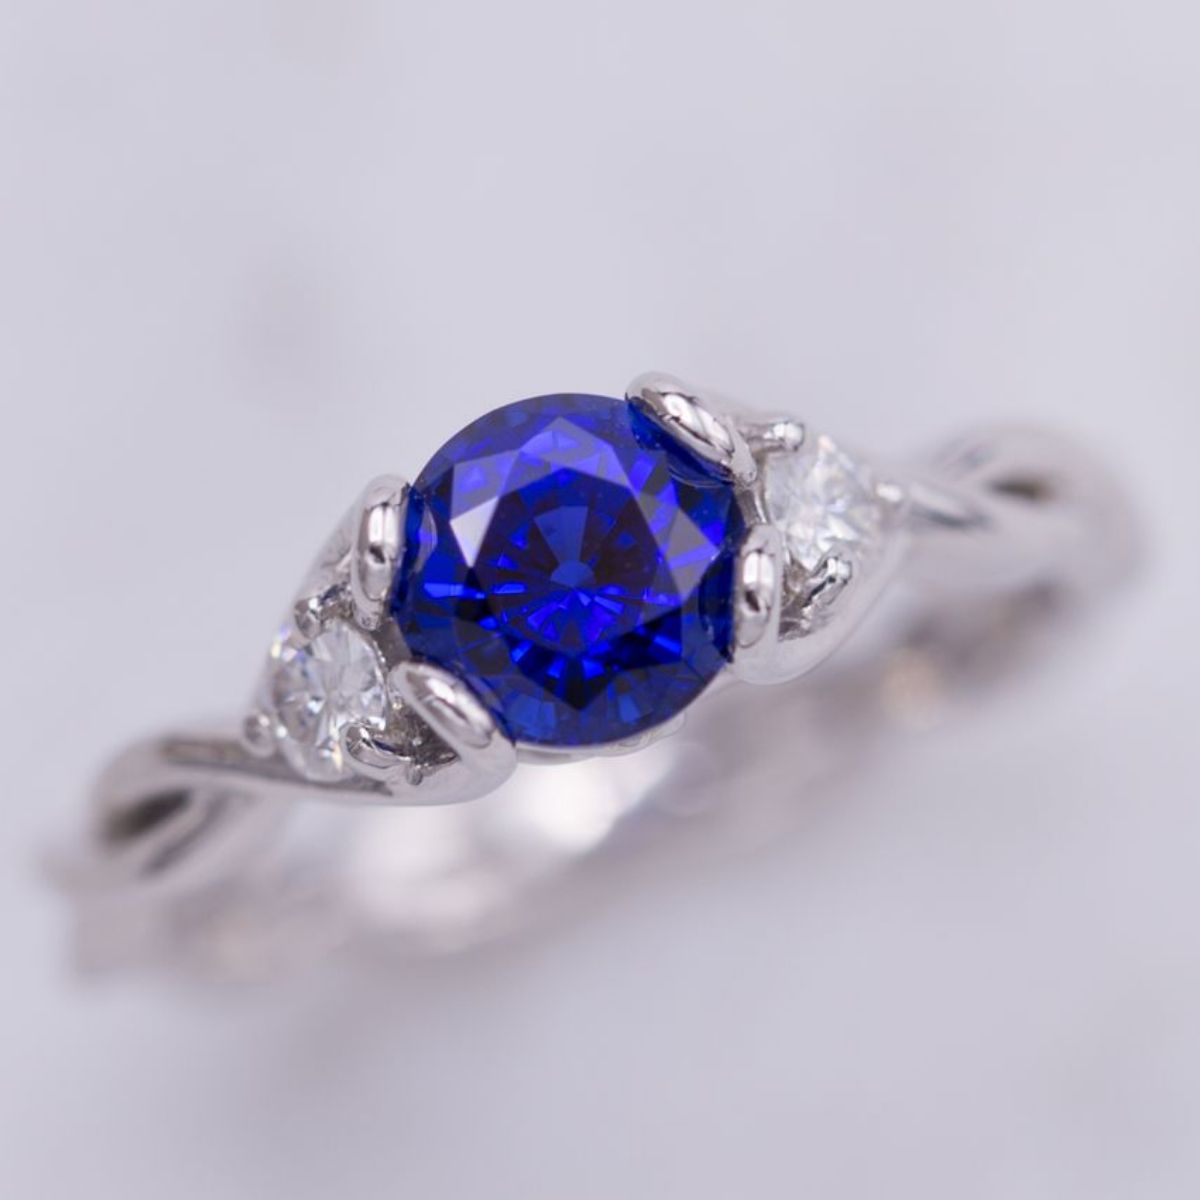 Sapphire Engagement Rings | CustomMade.com